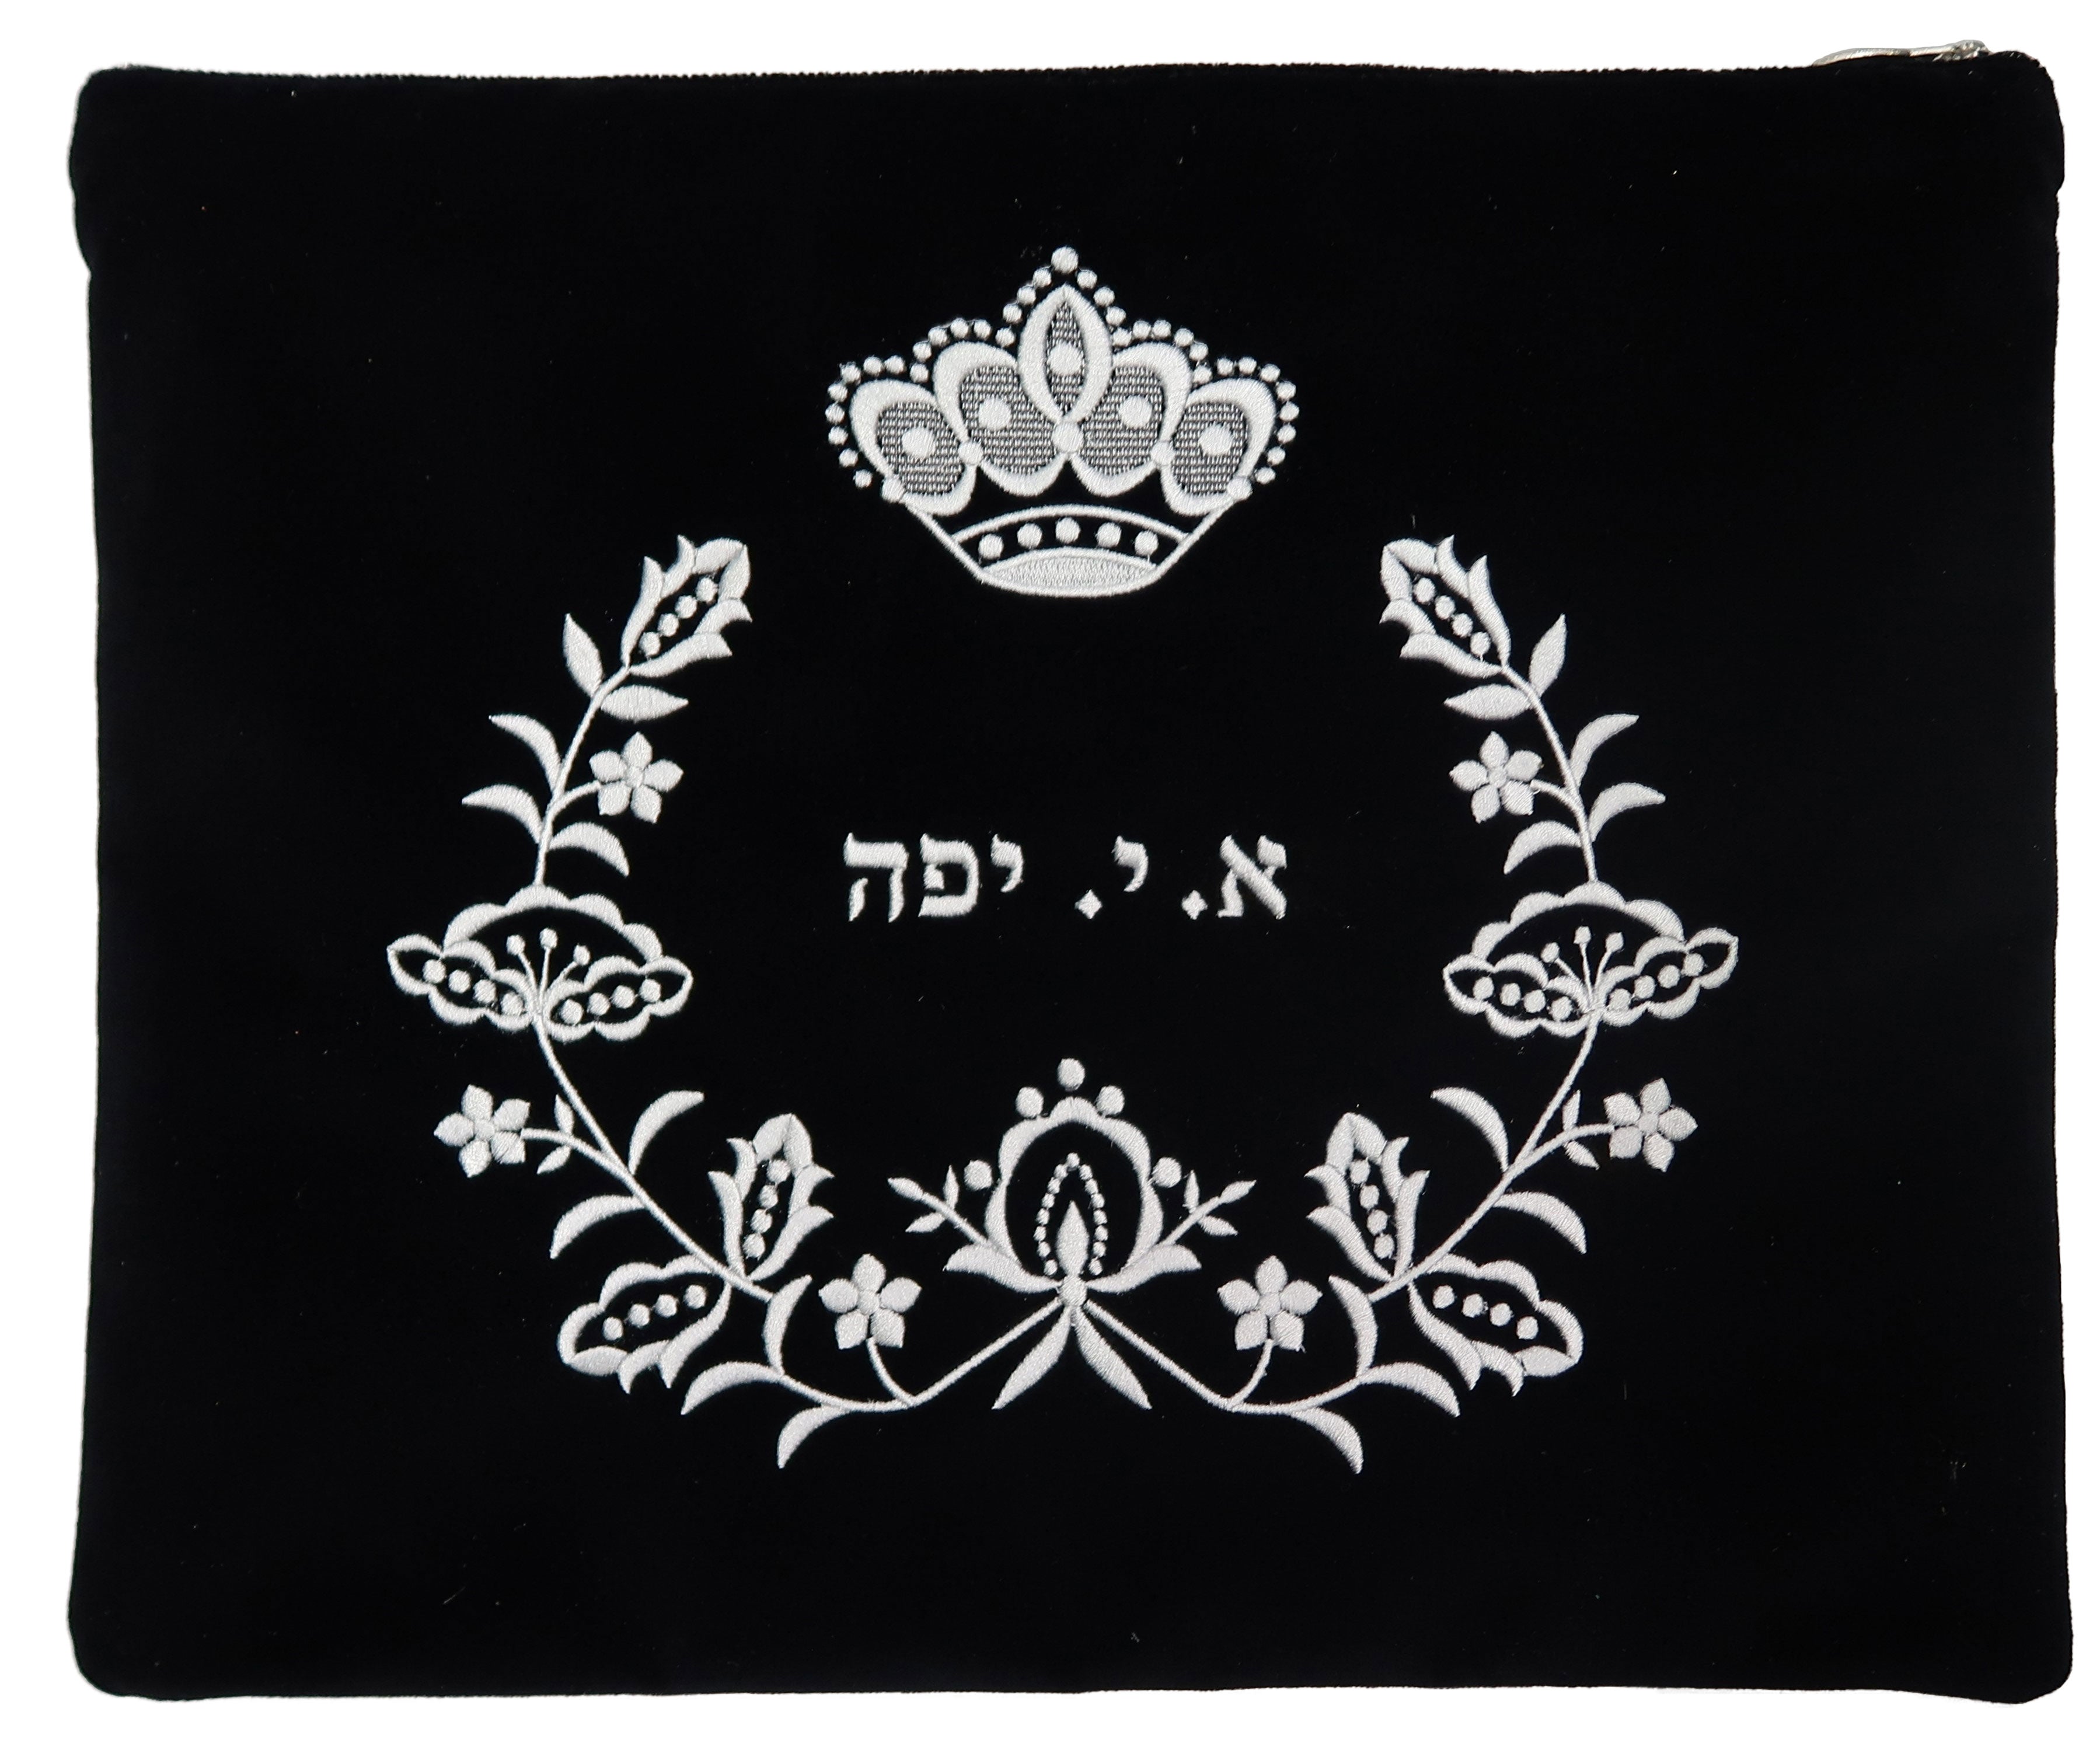 Black velvet Tallis and Tefillin bag with floral arch and crown design